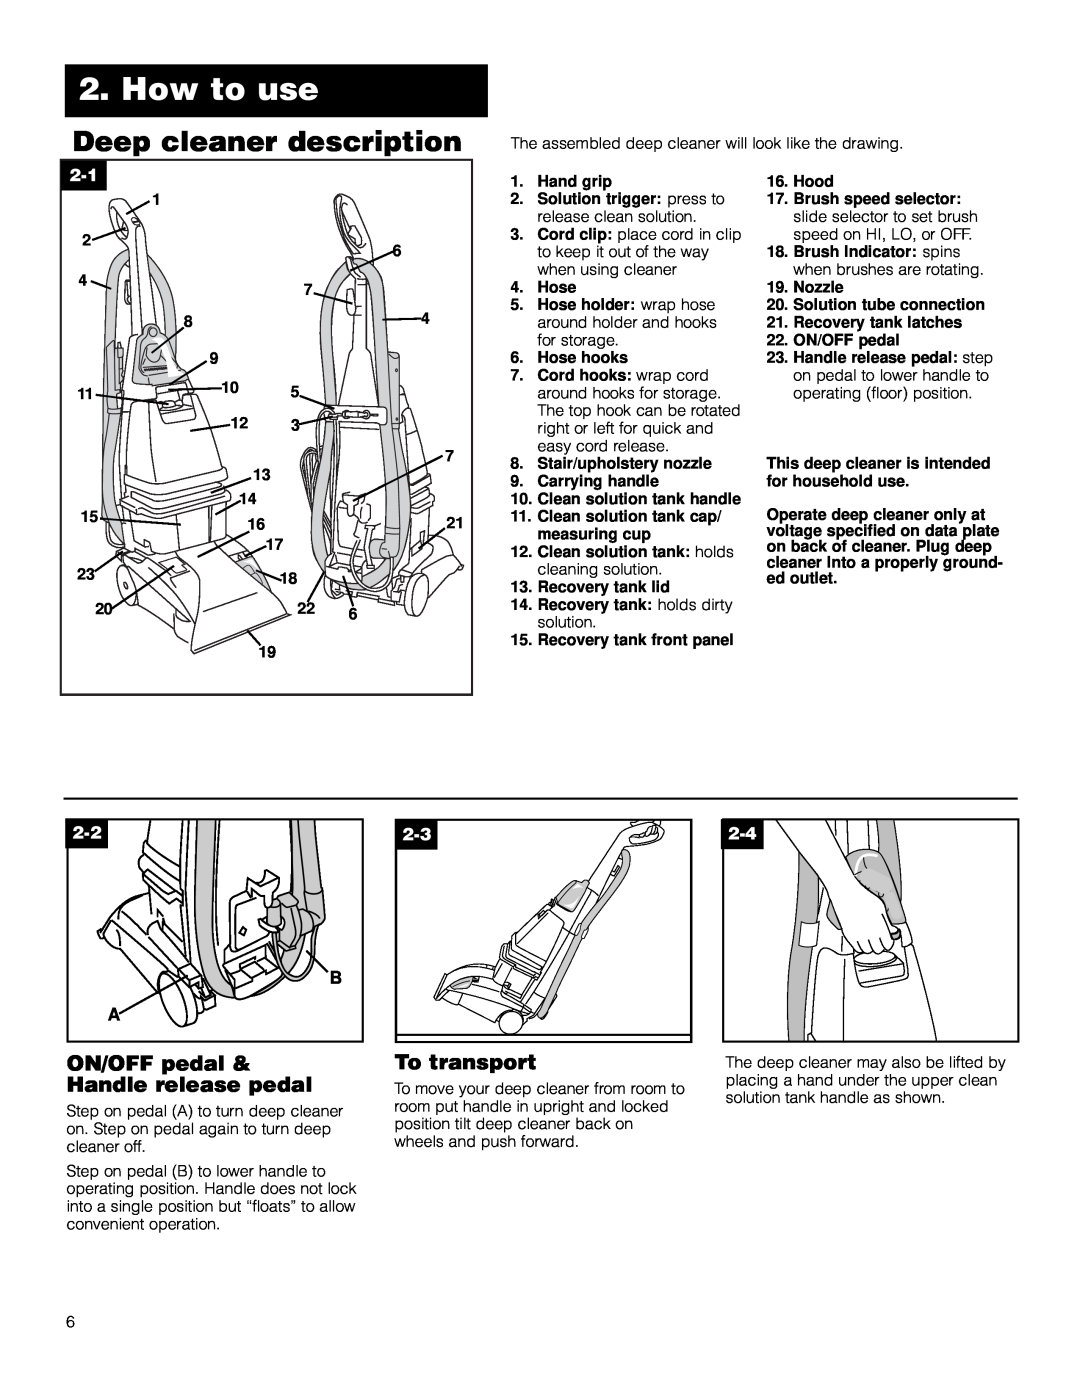 Hoover F5906900 owner manual How to use, ON/OFF pedal & Handle release pedal, To transport 